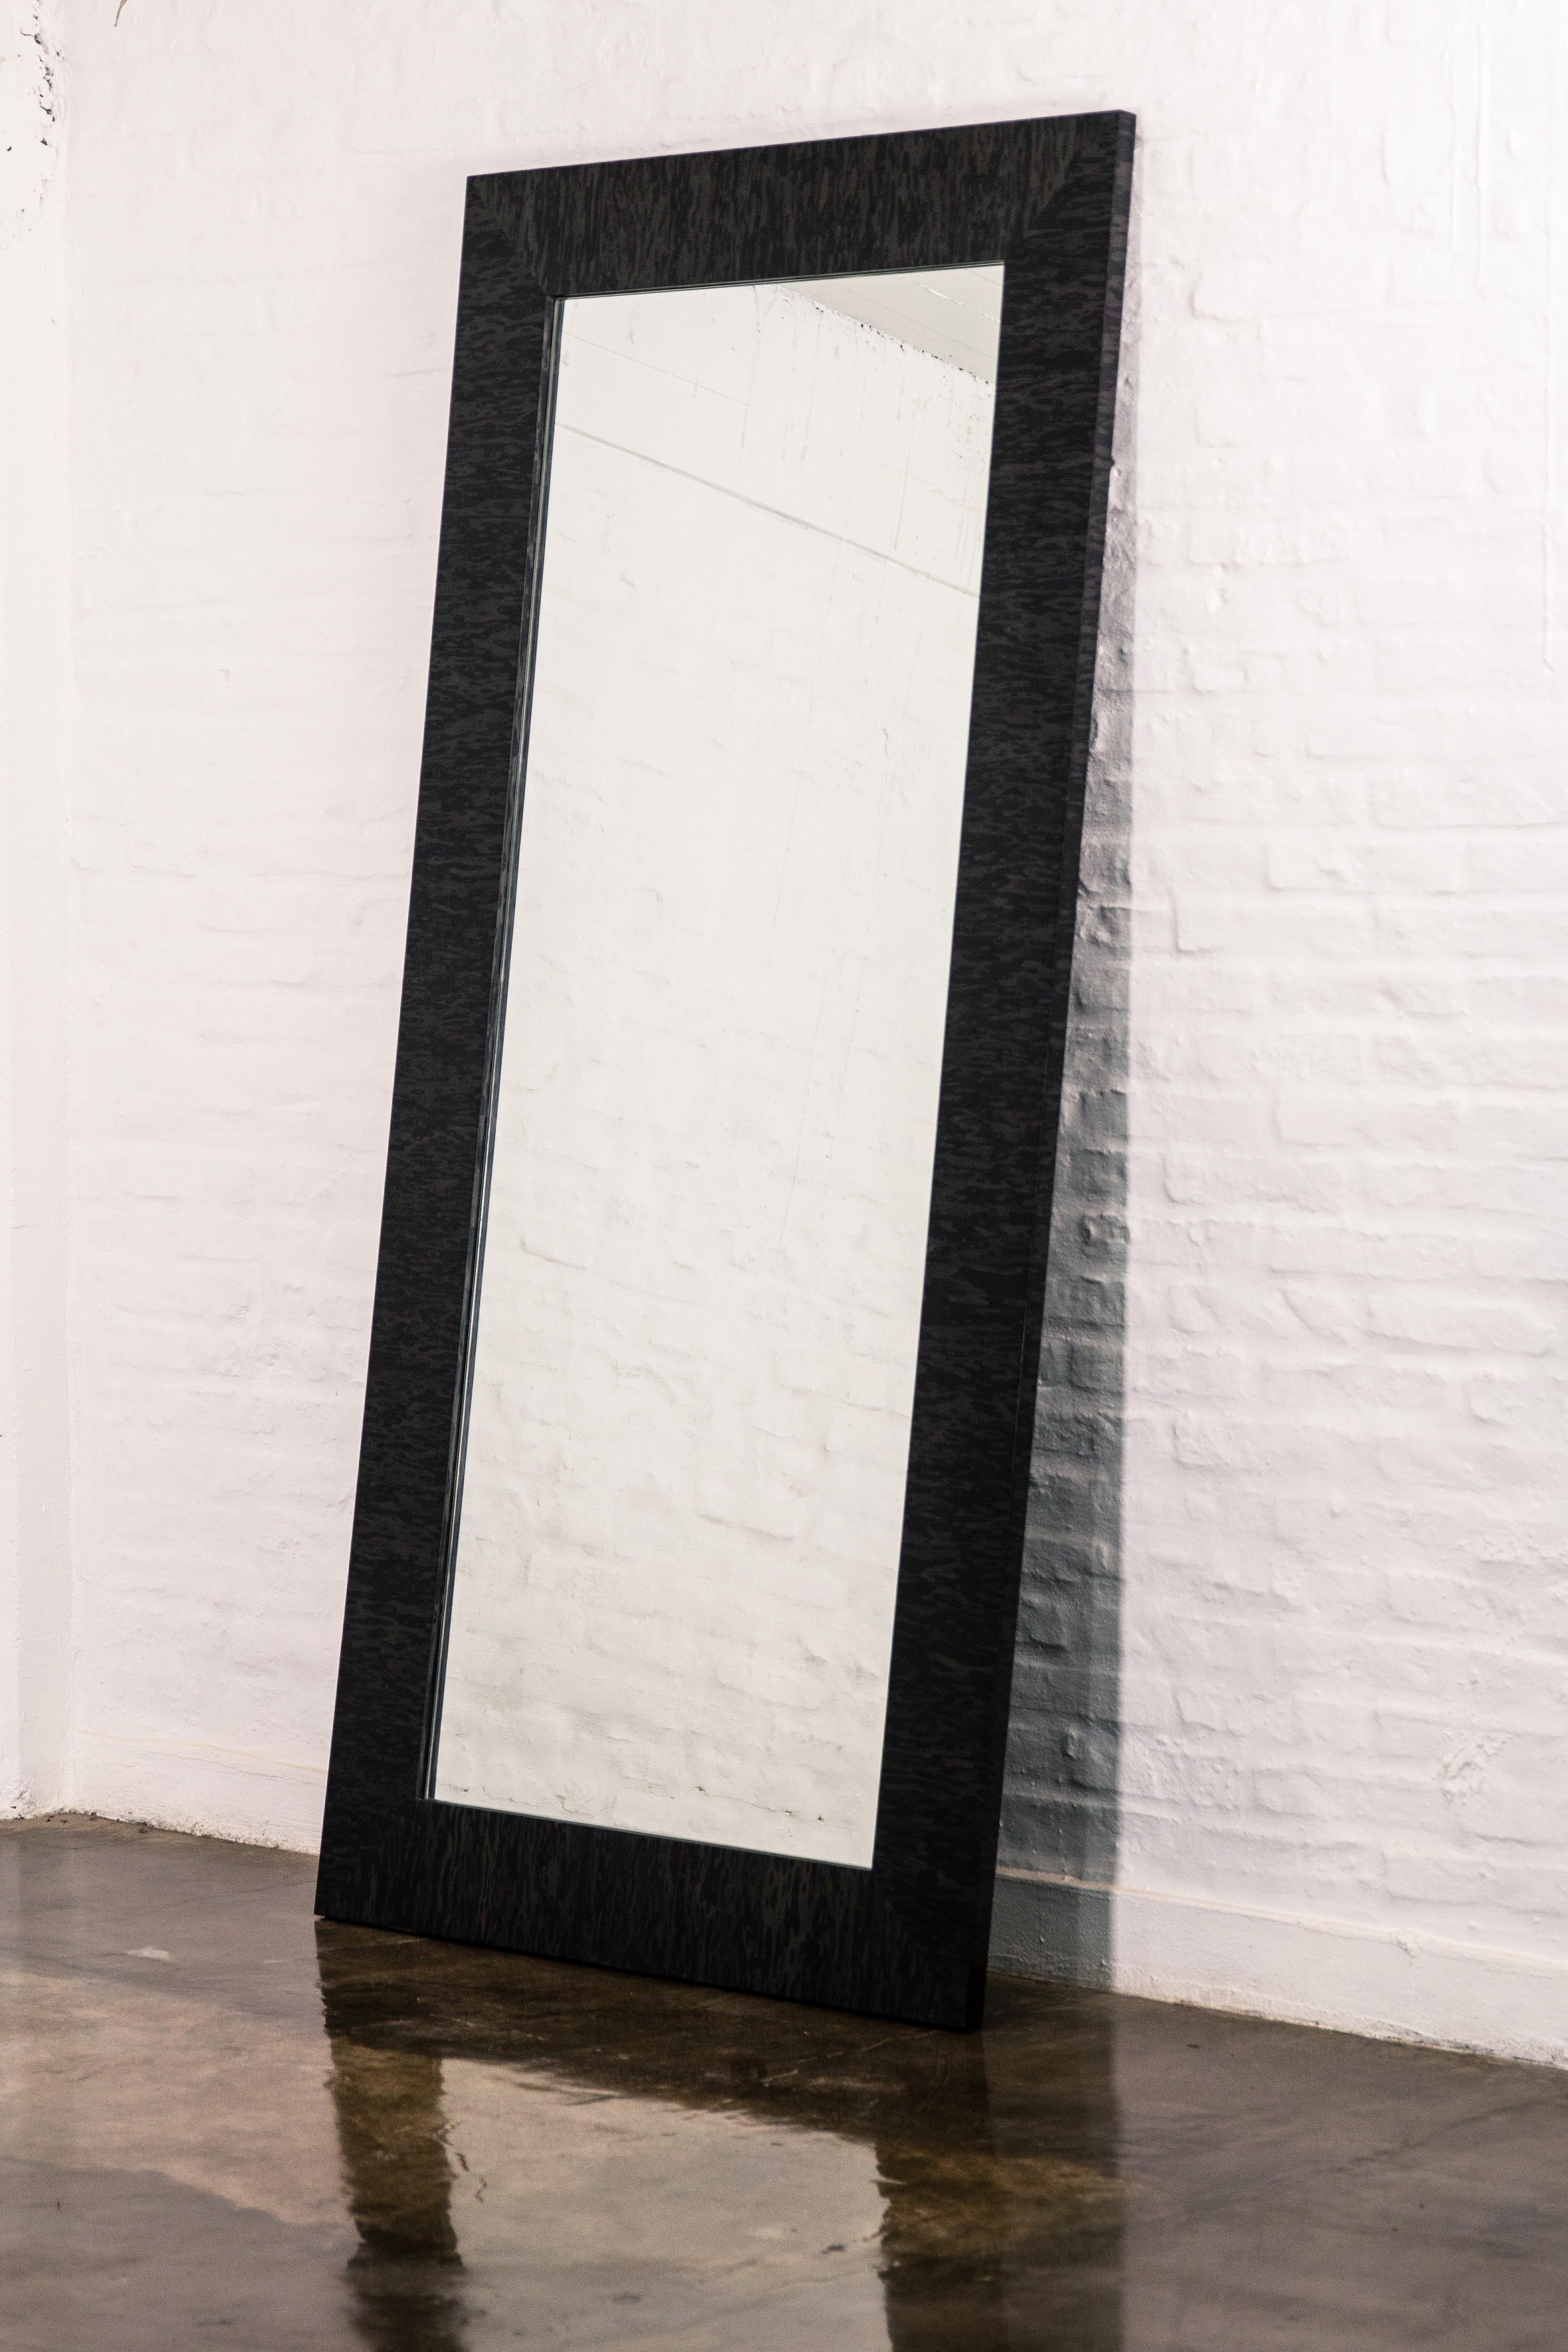 This gorgeous free standing mirror is in stock at our New York warehouse and available for immediate delivery.  Also available in custom sizes, finish or material of your choice.
Other materials available are African Teak, Black Maple, Bubinga,